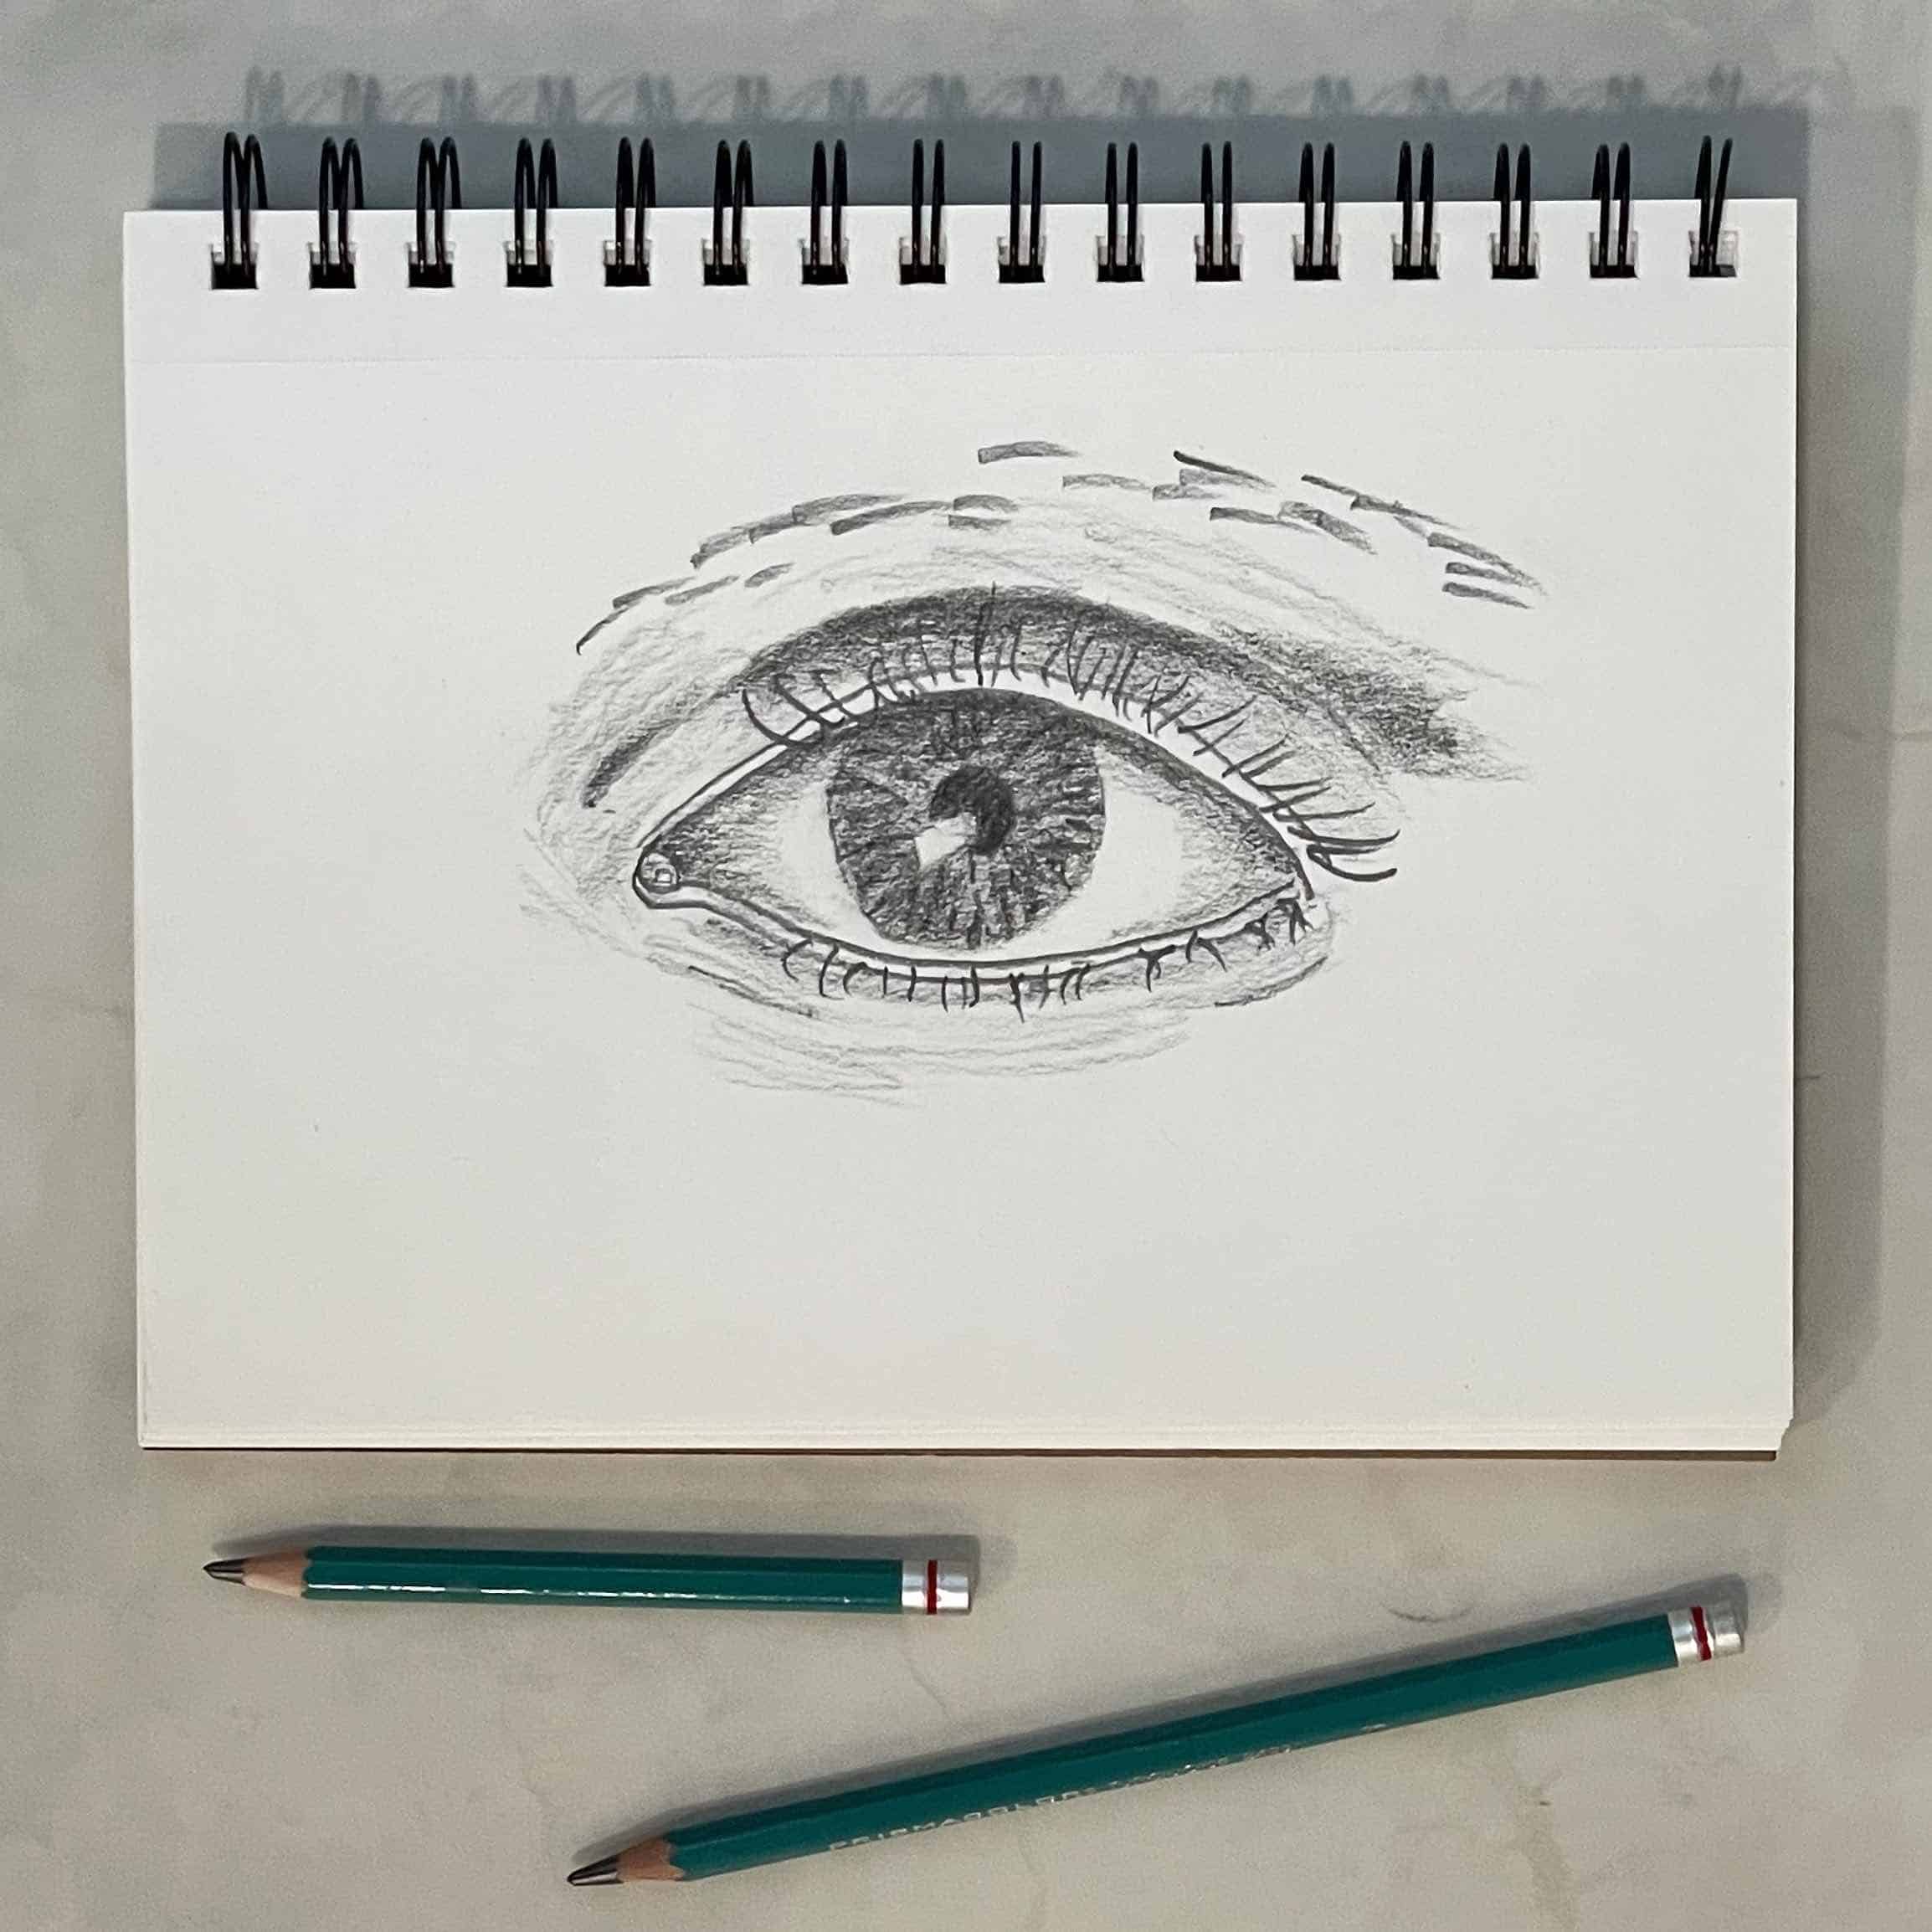 Pencil sketch of an eye on a sketch pad with drawing pencils.